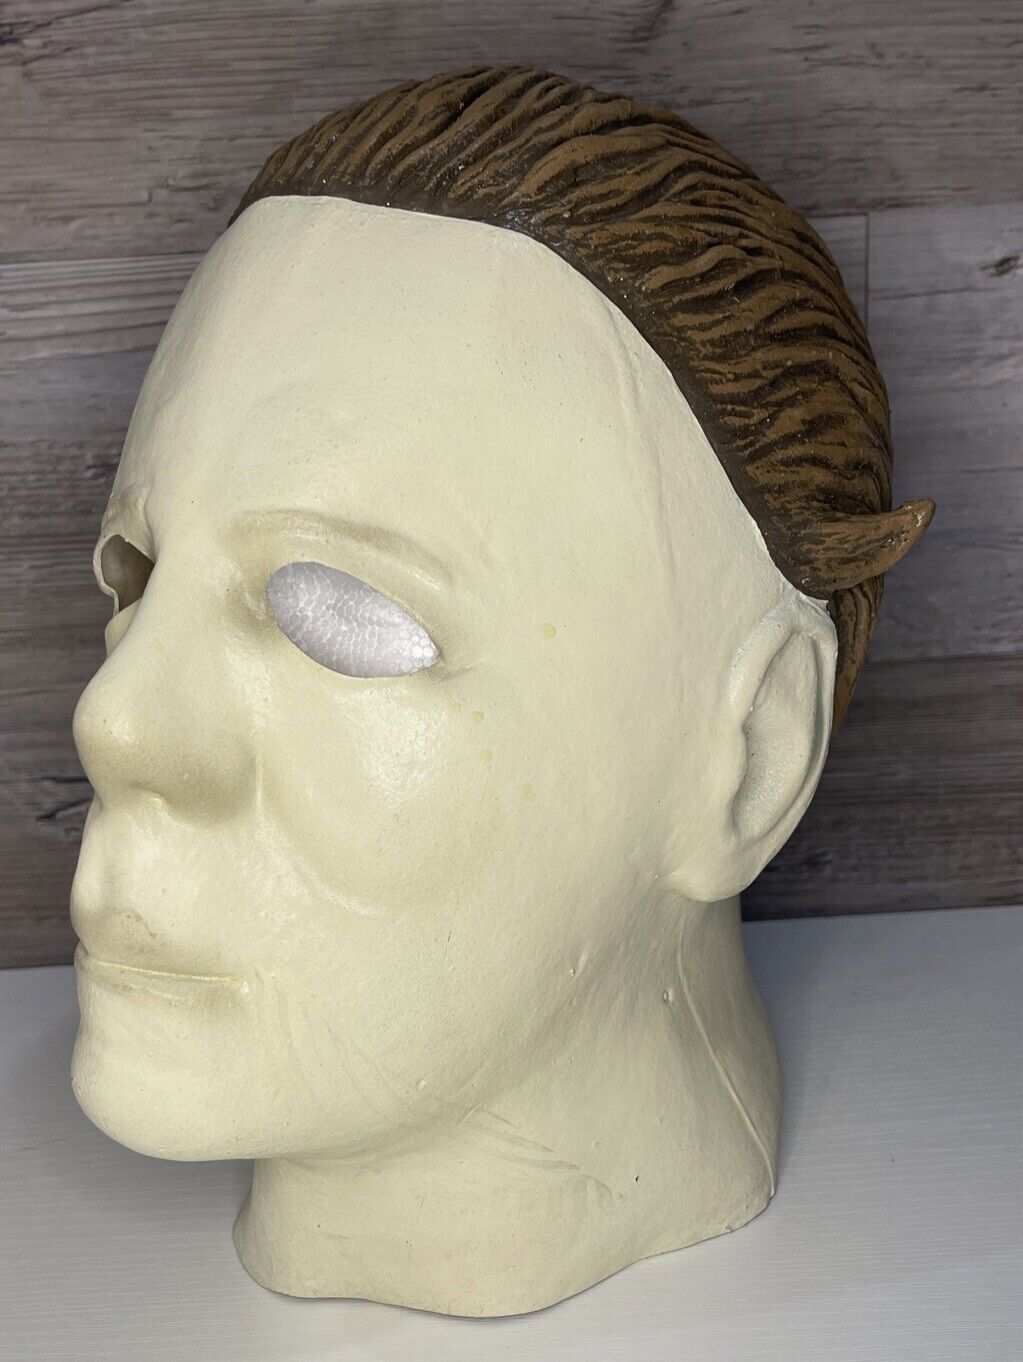 Vintage Halloween 2 Michael Myers  by Trick or Treat Studios Justin Mabry